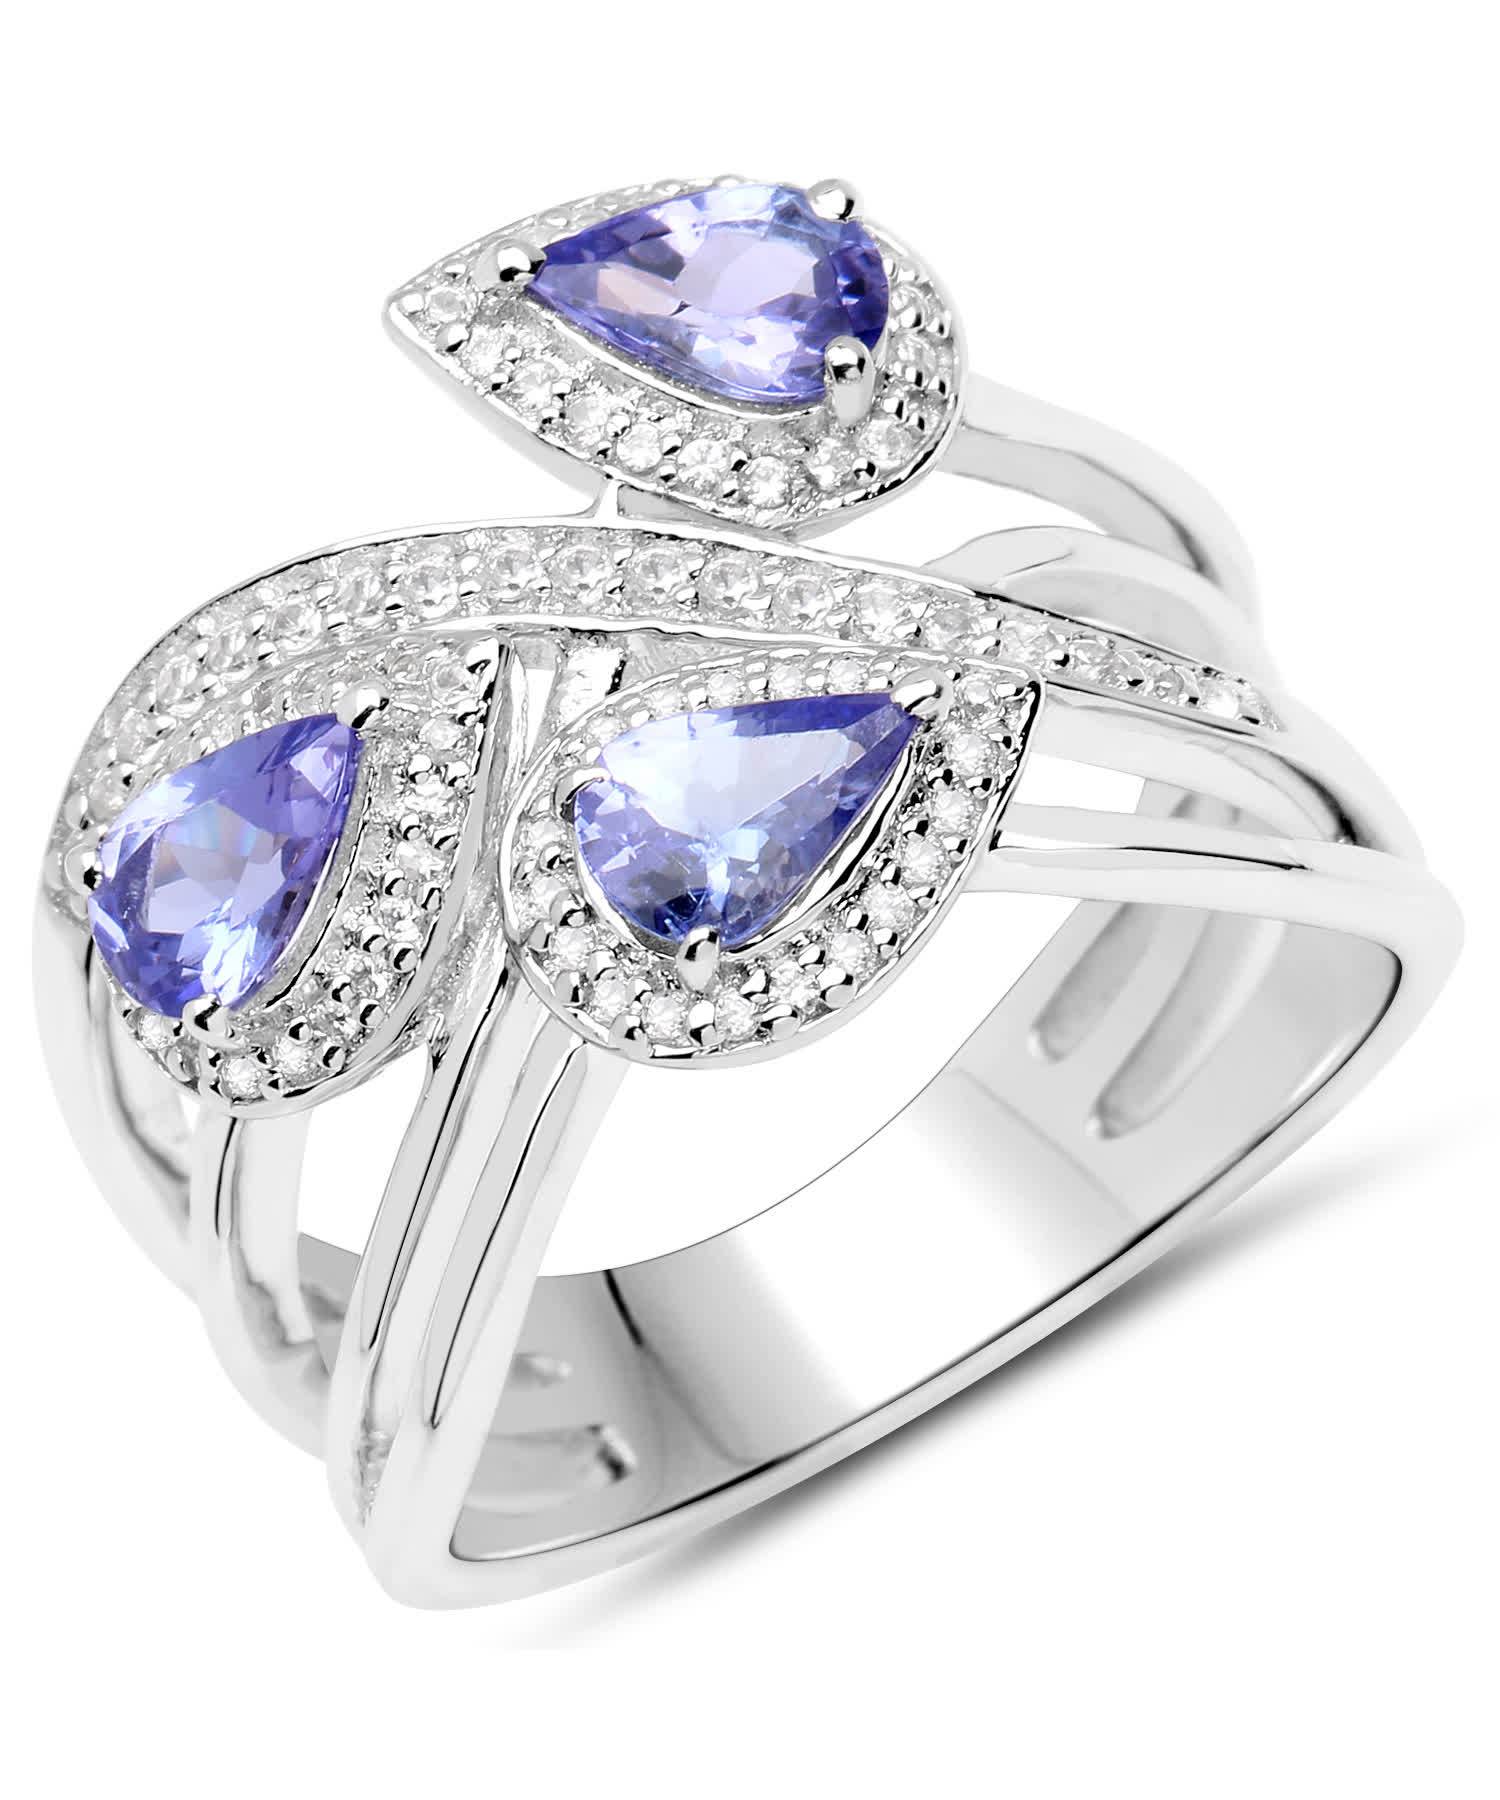 1.52ctw Natural Tanzanite and Zircon Rhodium Plated 925 Sterling Silver Cocktail Ring View 2